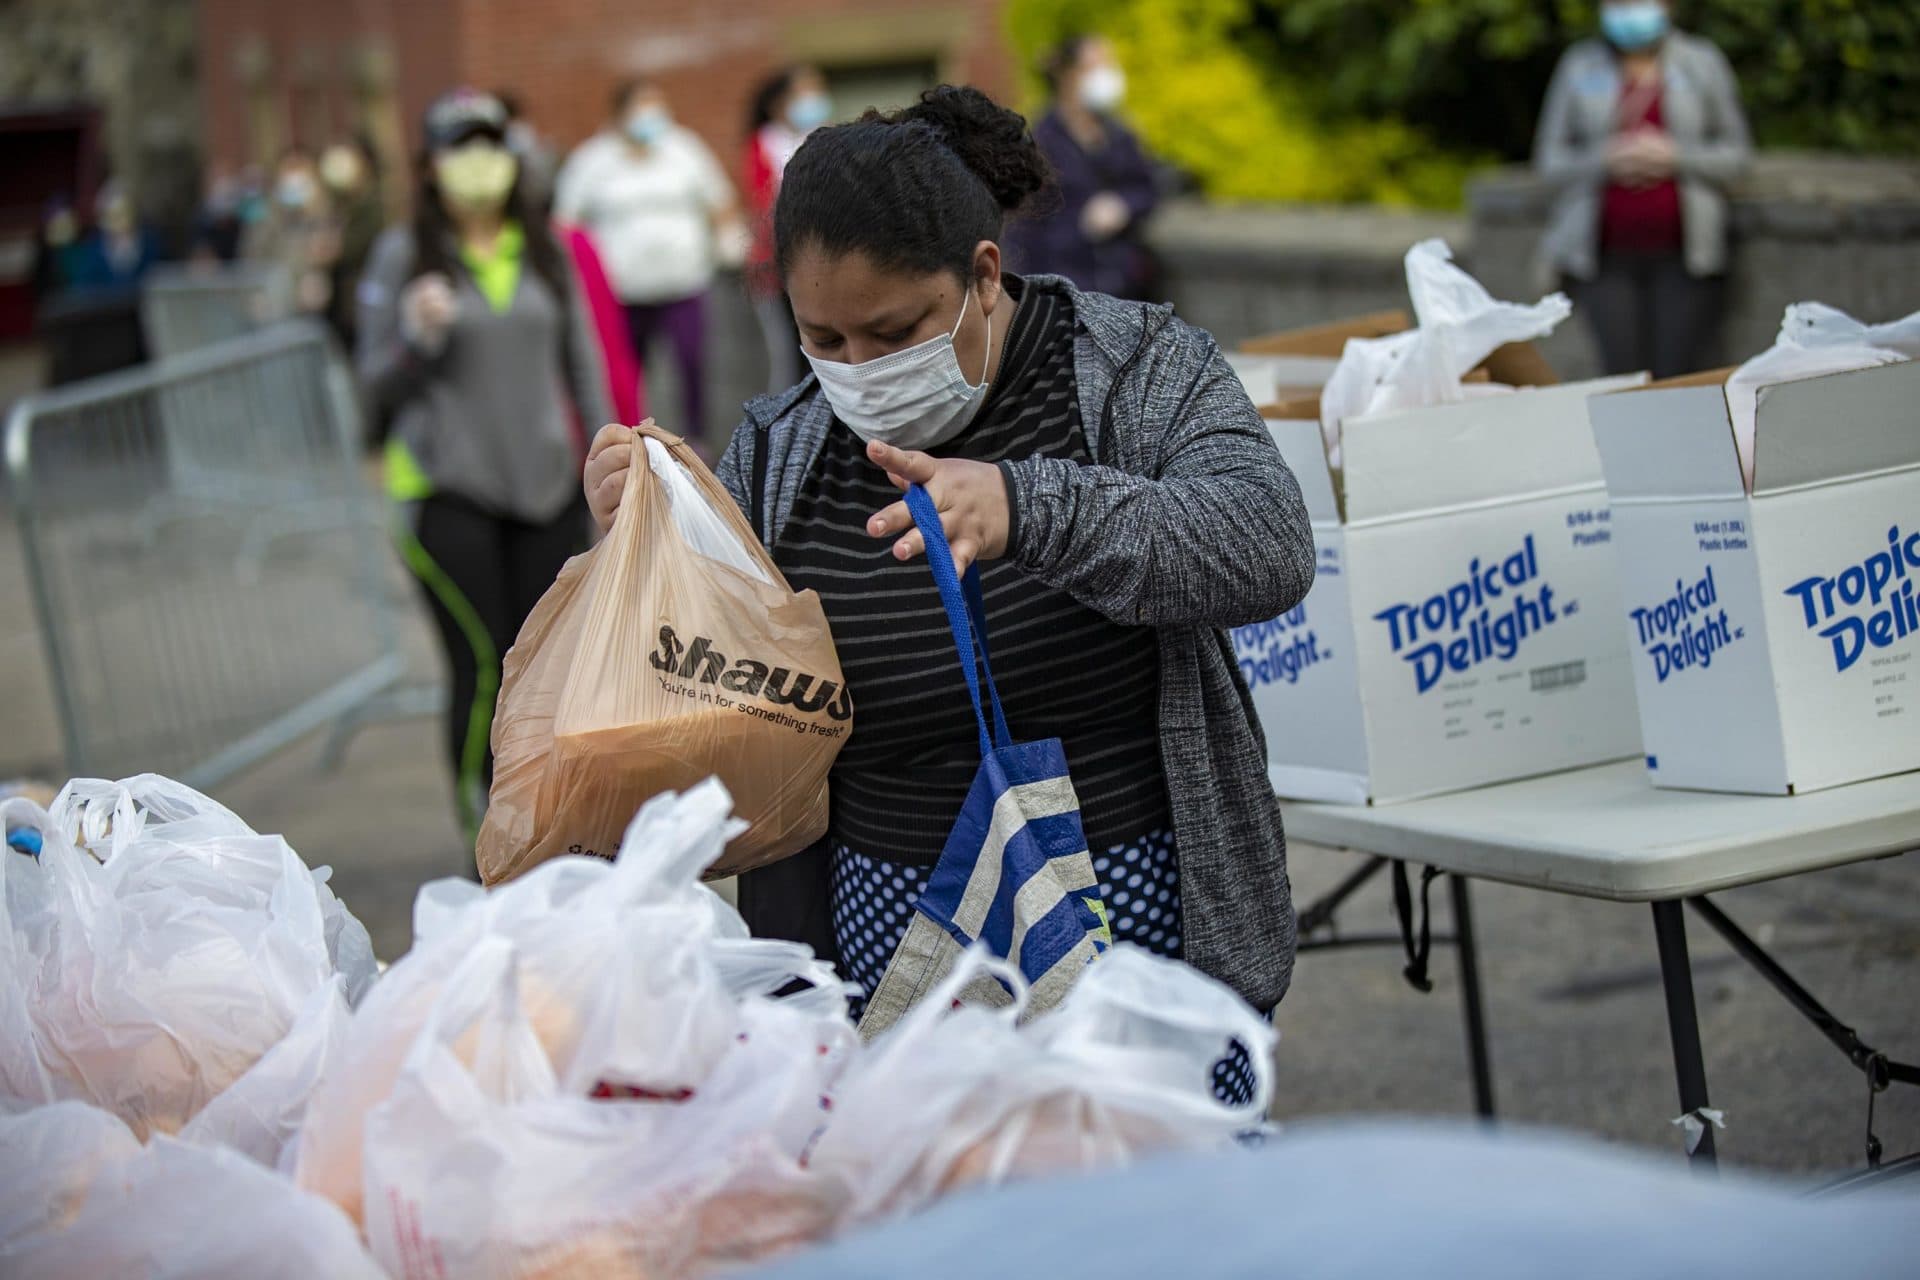 A woman picks up a prepared bag of food supplies. Hundreds of people and families lined up on foot and in their vehicles at St. Mary Parish in Waltham on a recent Thursday to receive food assistance. (Jesse Costa/WBUR)